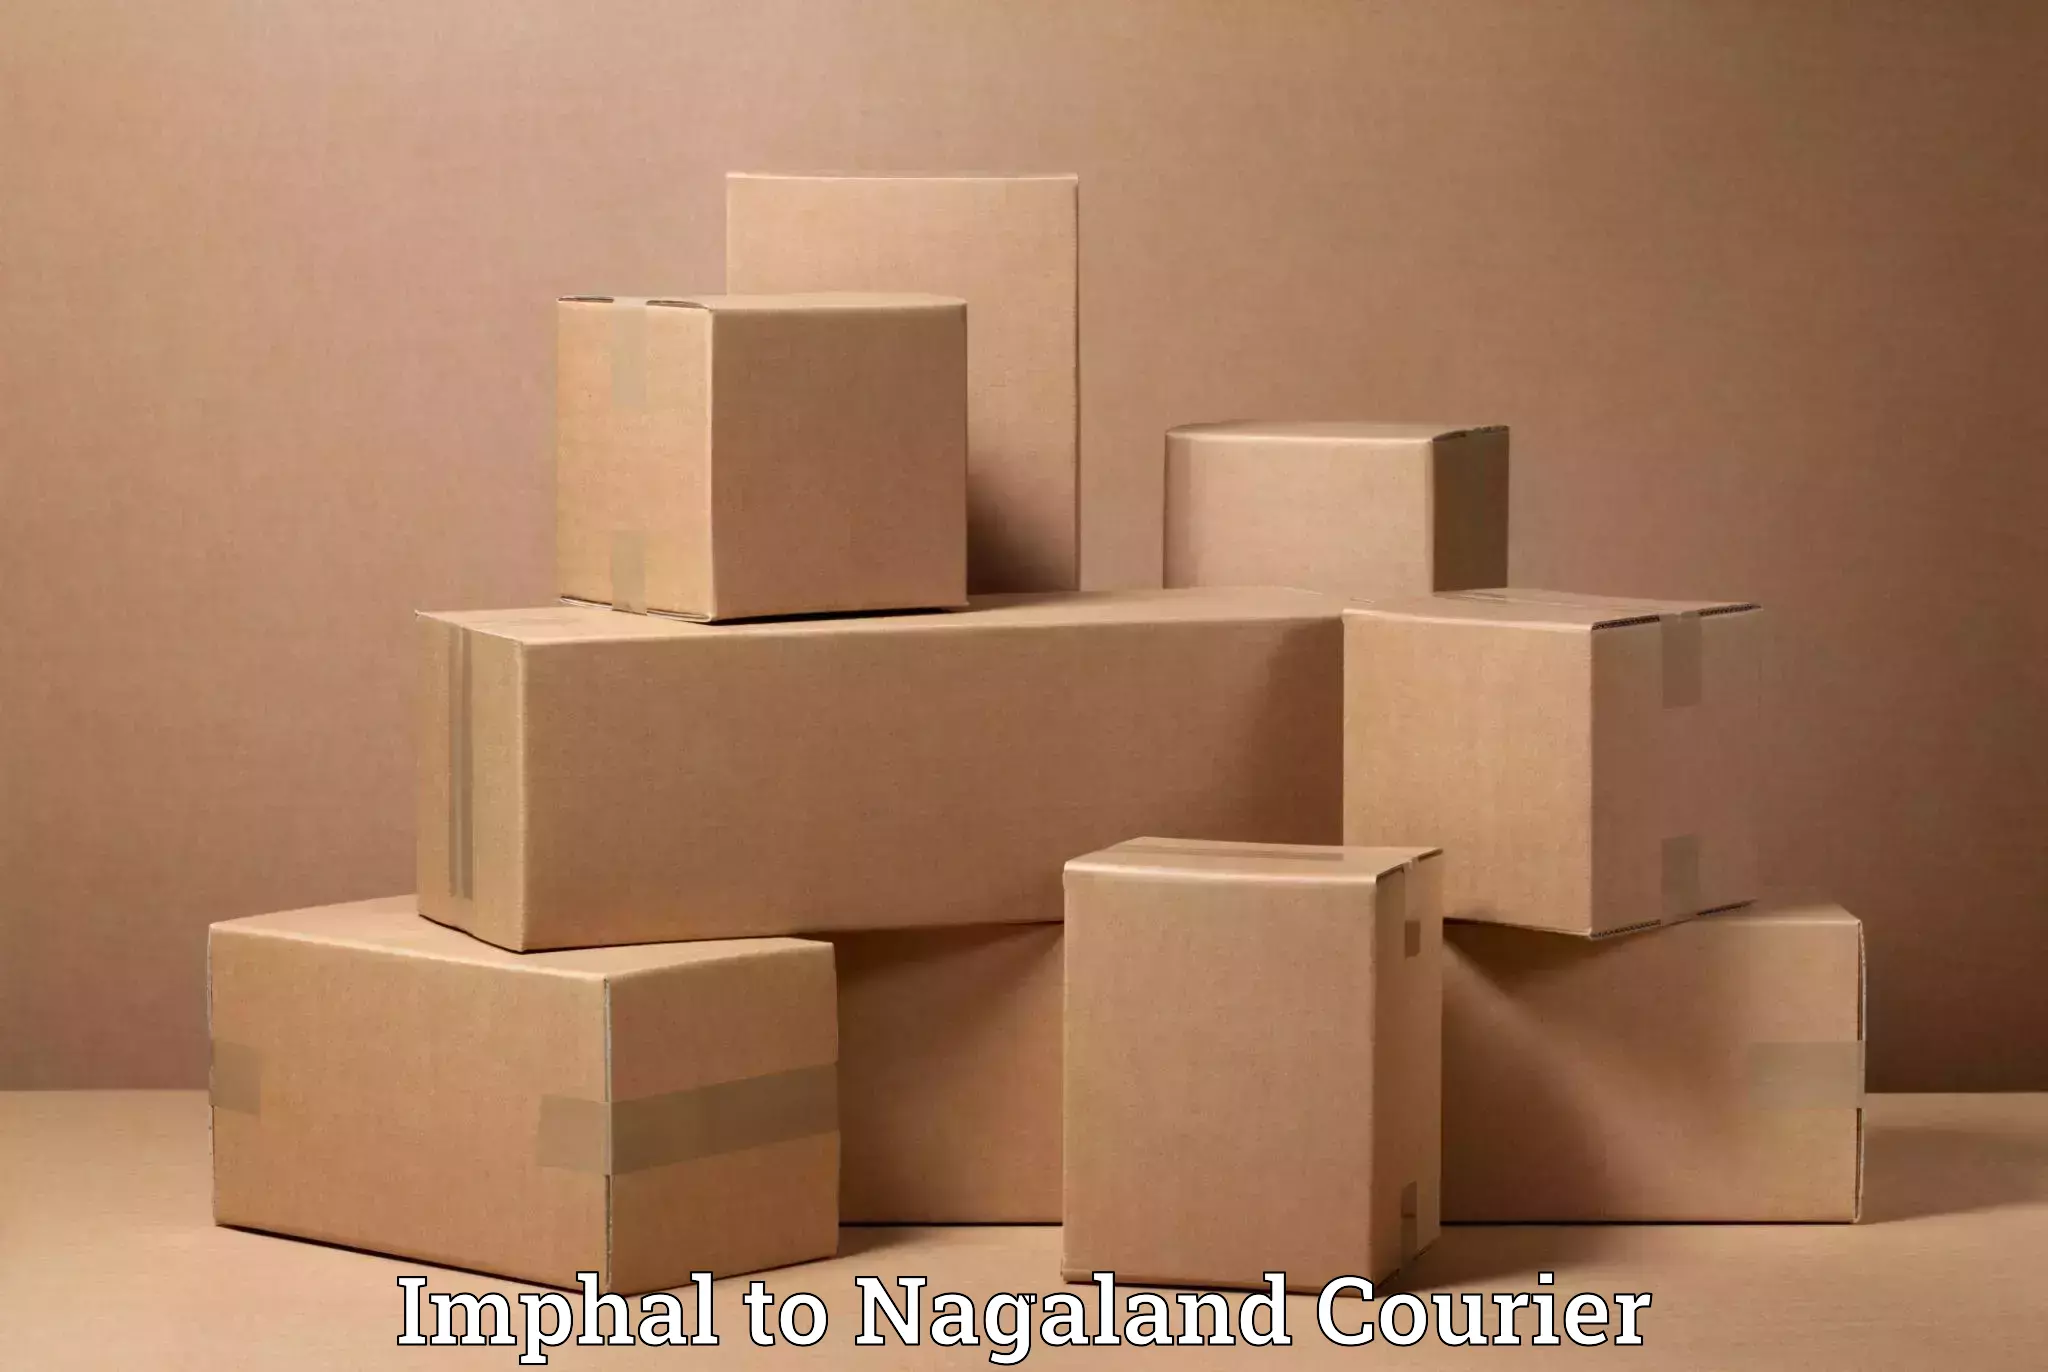 Moving and storage services Imphal to Dimapur